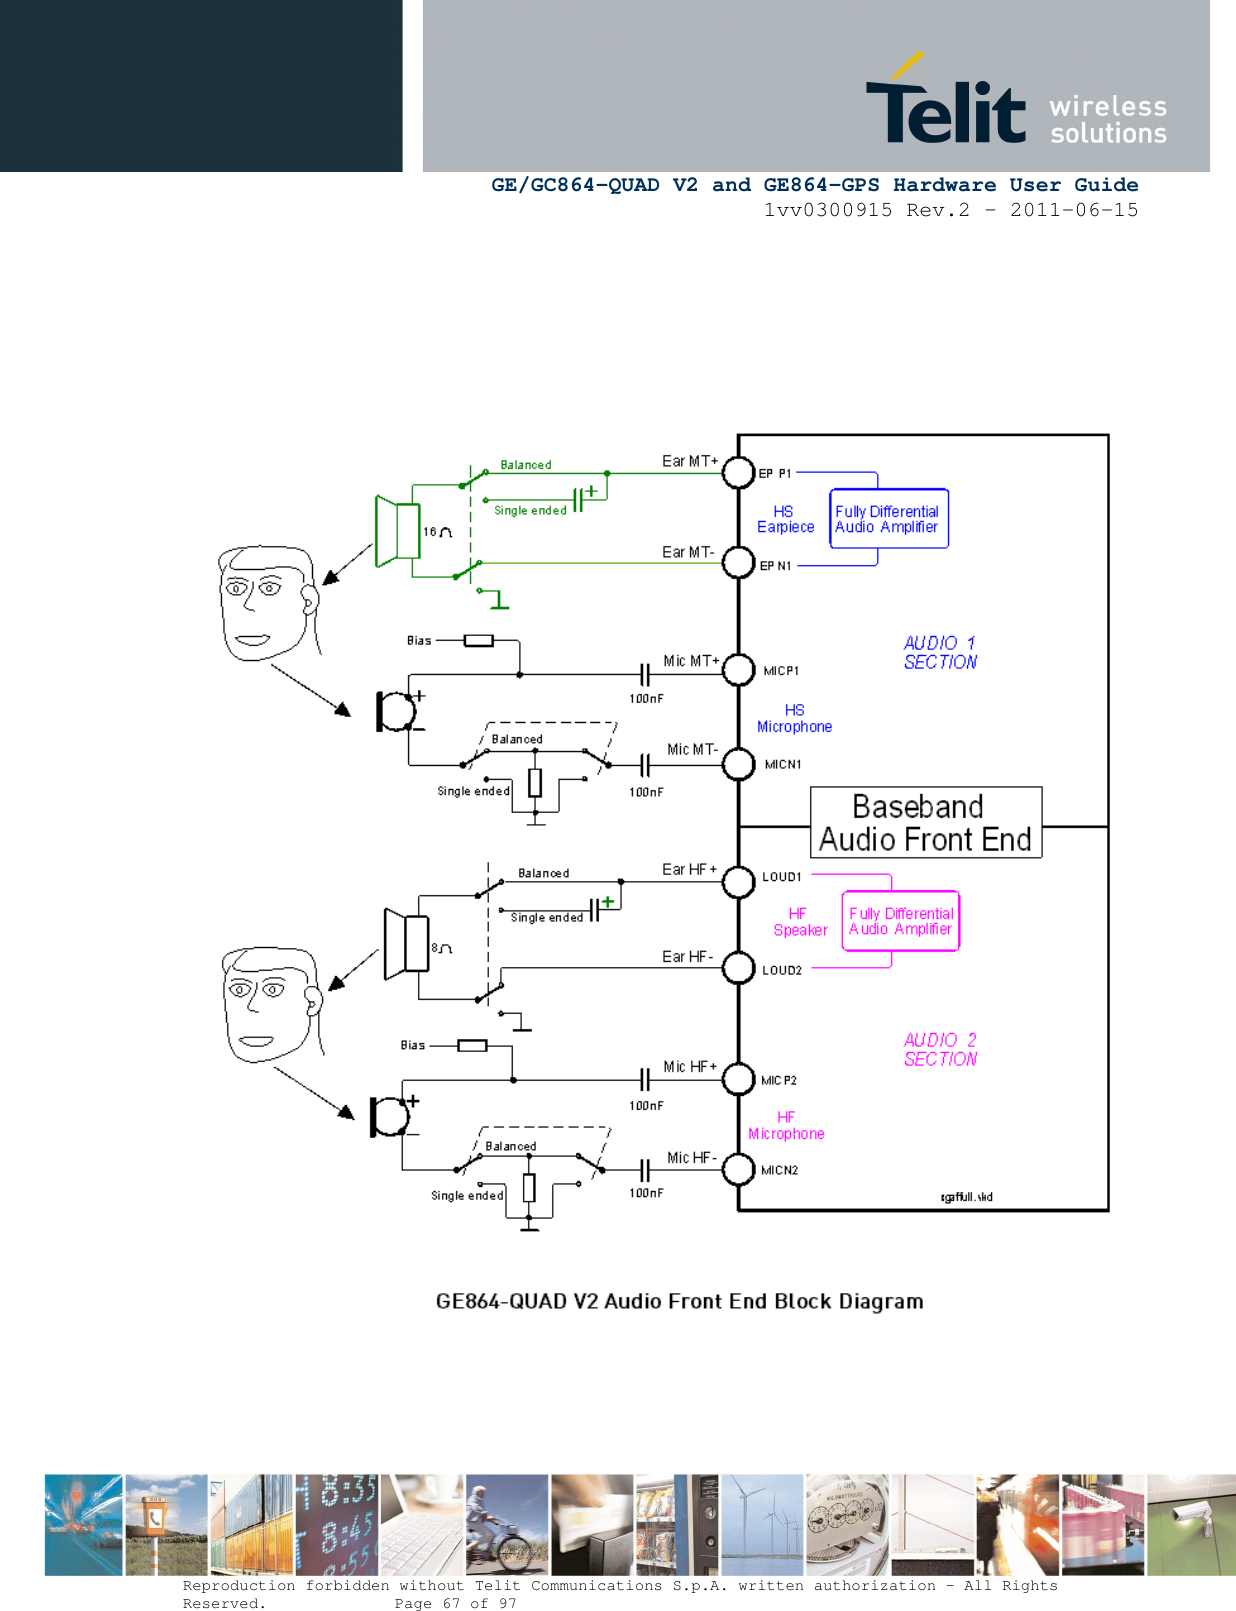      GE/GC864-QUAD V2 and GE864-GPS Hardware User Guide 1vv0300915 Rev.2 – 2011-06-15  Reproduction forbidden without Telit Communications S.p.A. written authorization - All Rights Reserved.    Page 67 of 97         